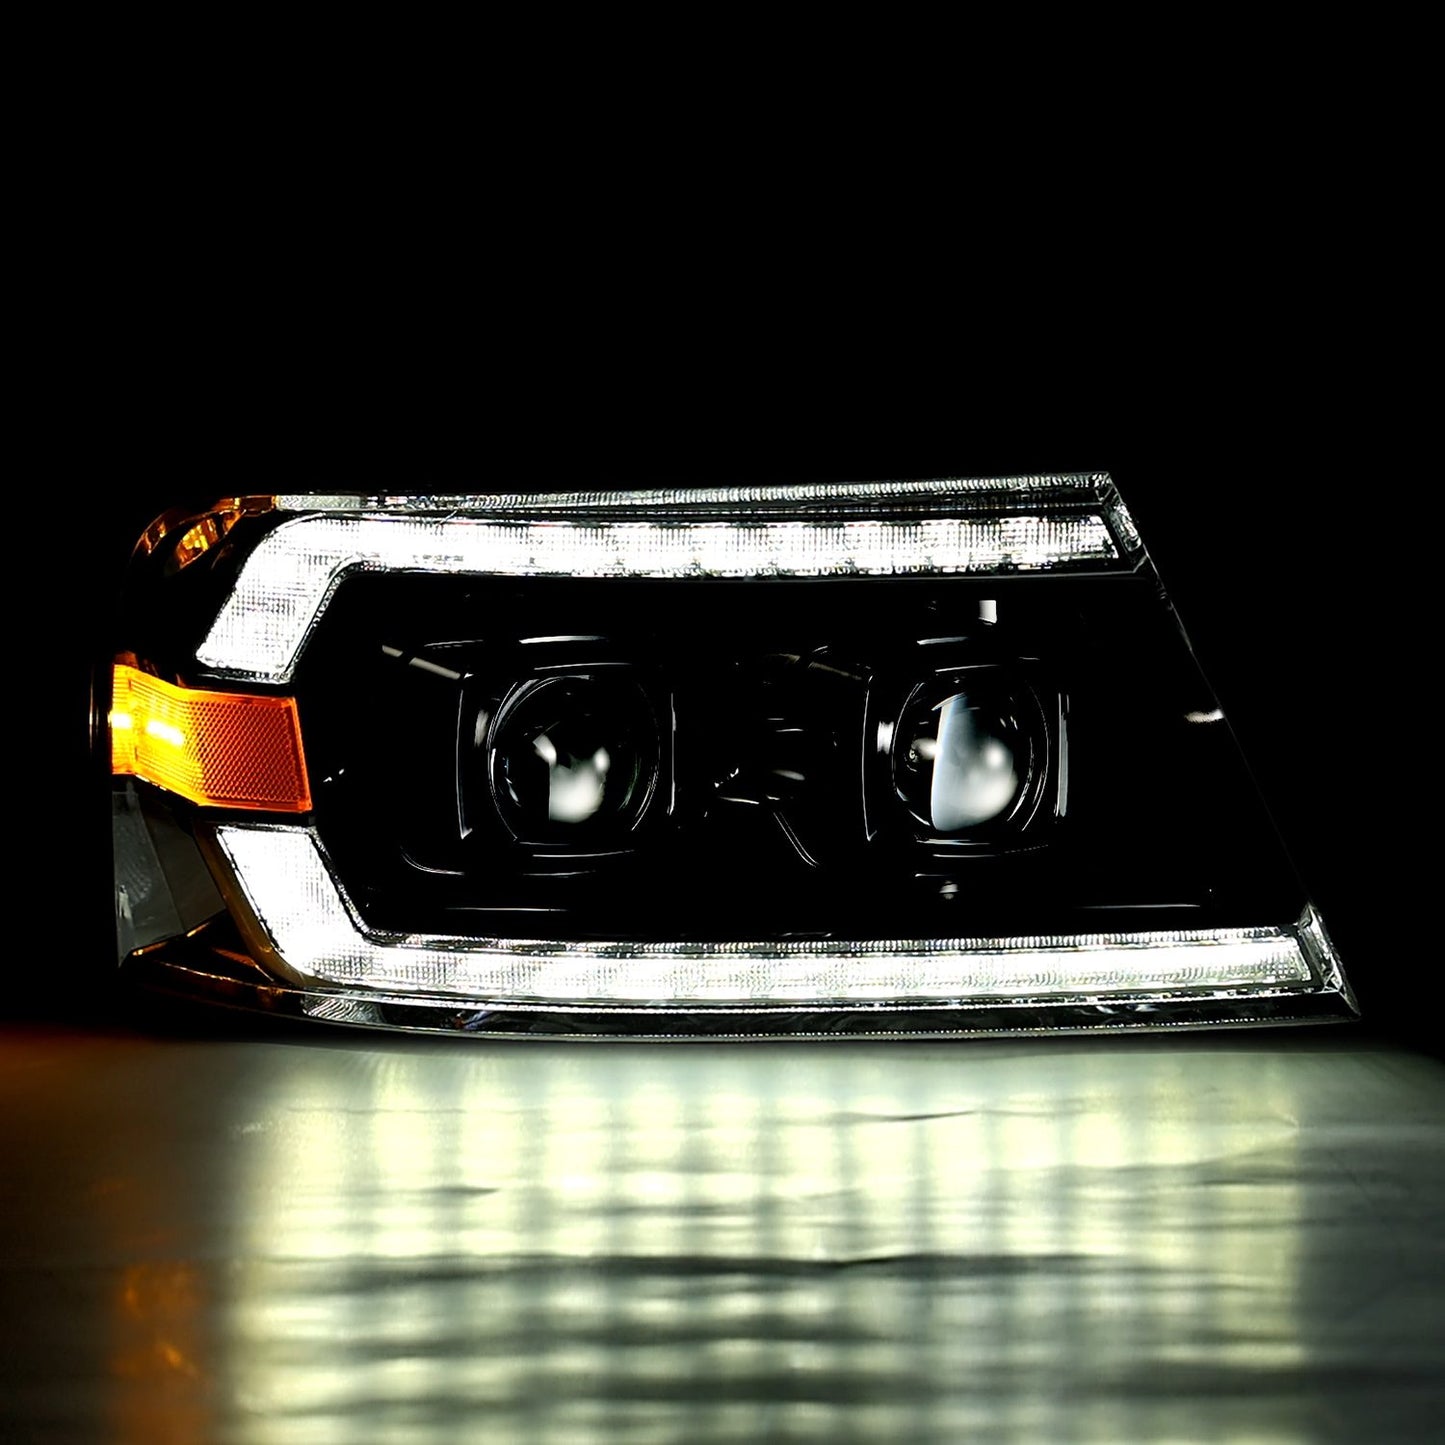 2004-2008 Ford F150 Alpharex LUXX-Series LED Projector Headlights